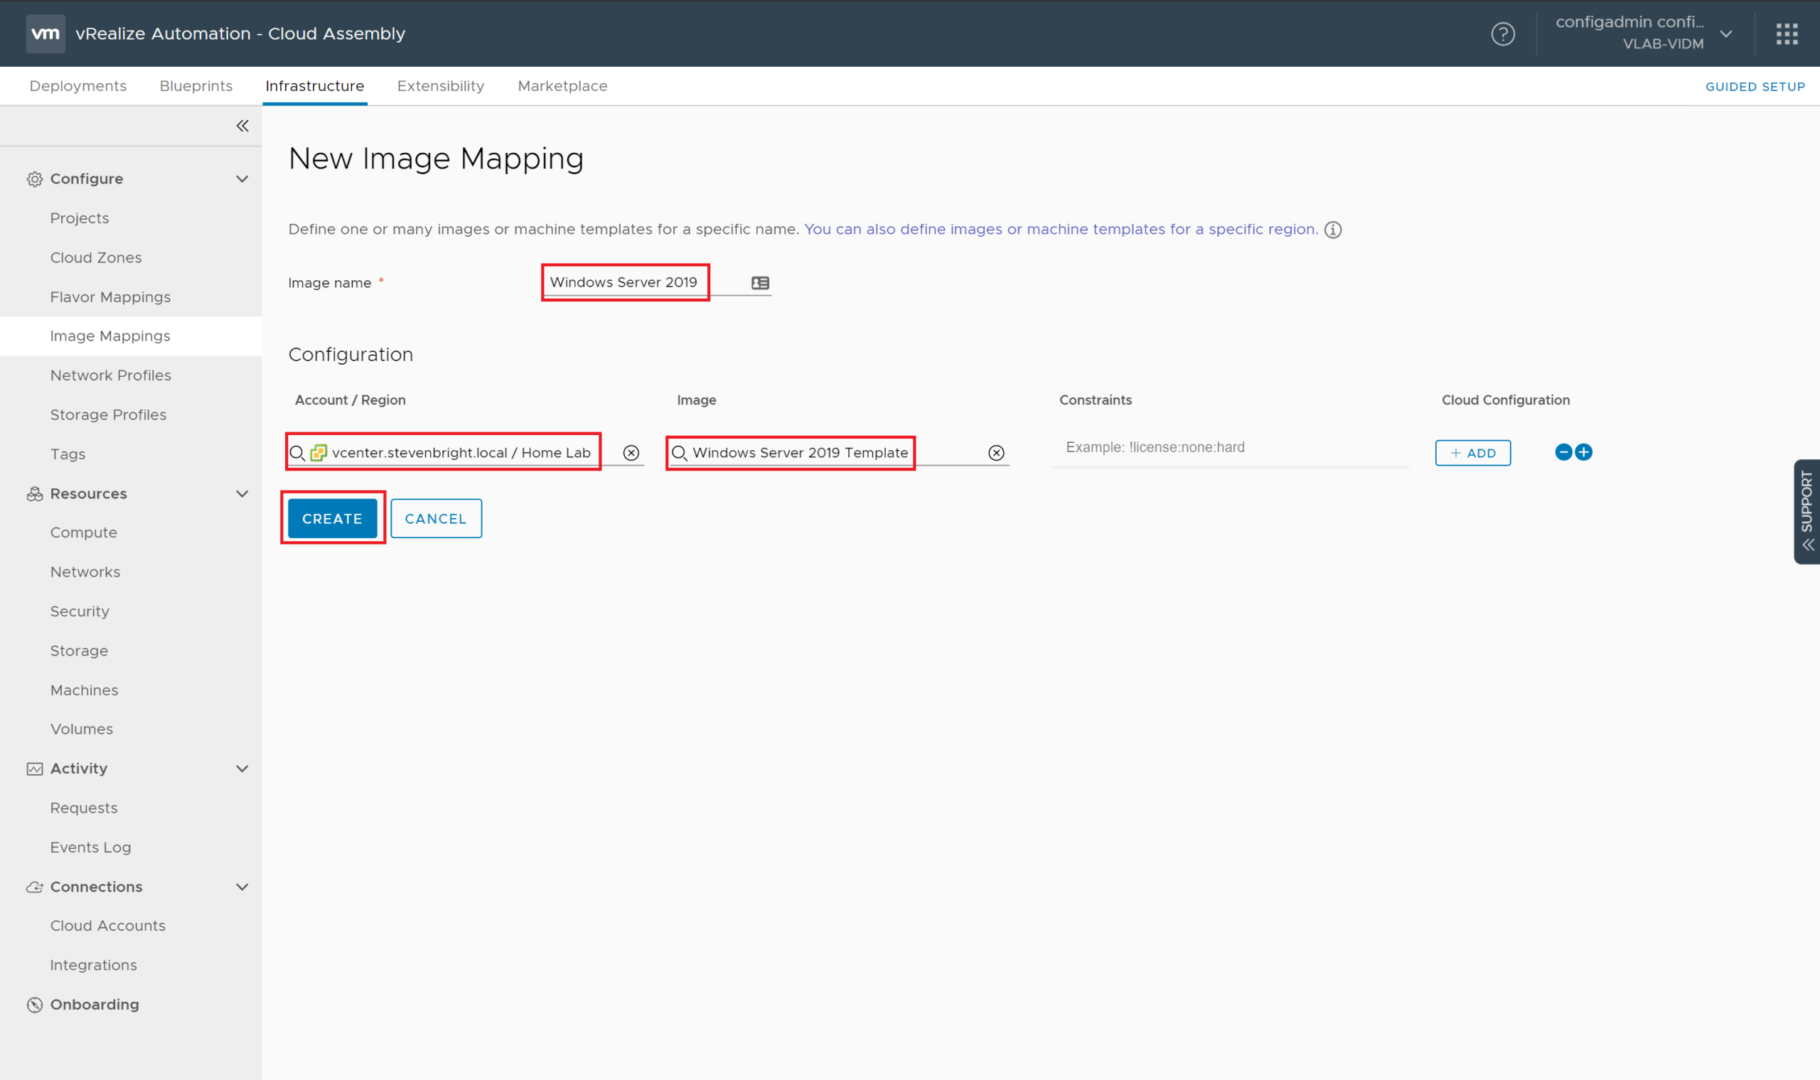 vRealize Automation 8.0 - Cloud Assembly - Image Mappings - New Image Mapping